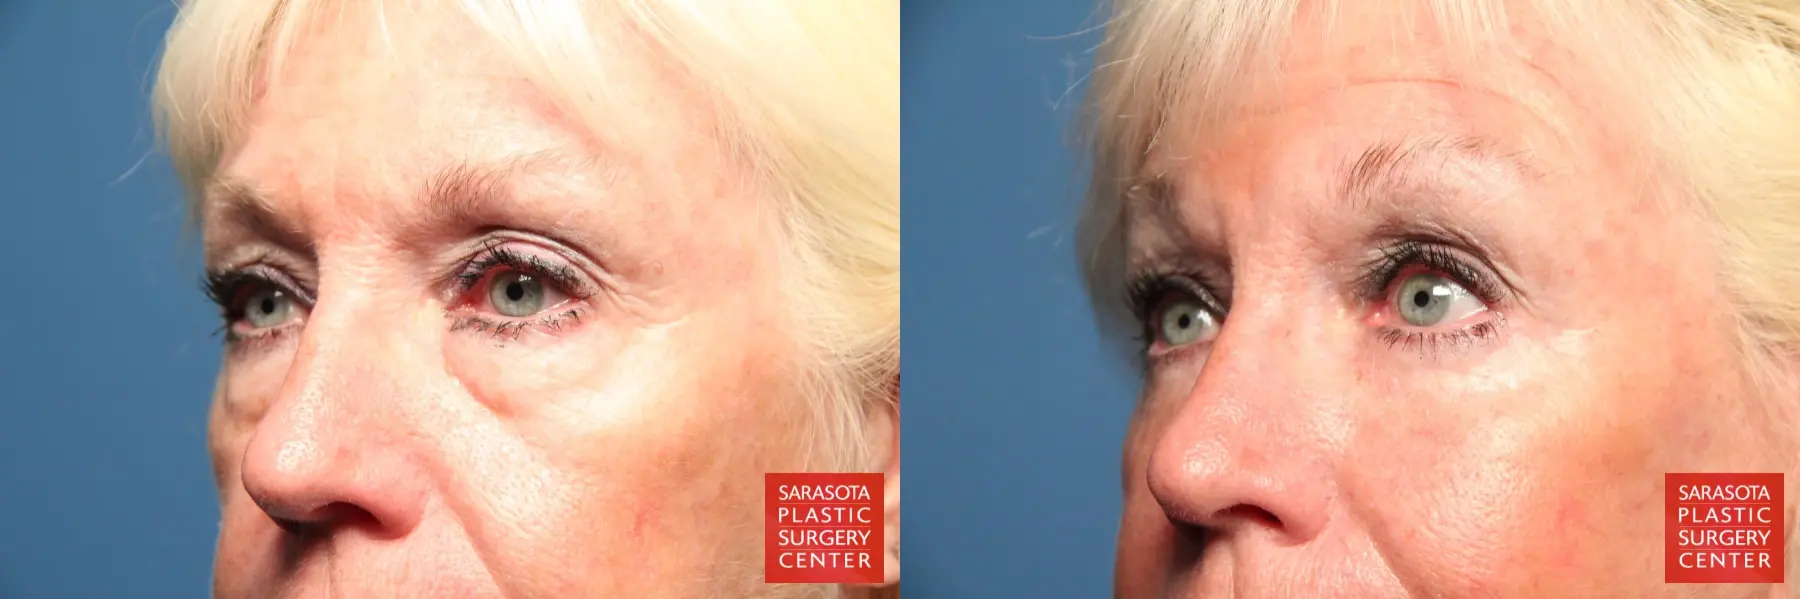 Eyelid Surgery: Patient 1 - Before and After 4